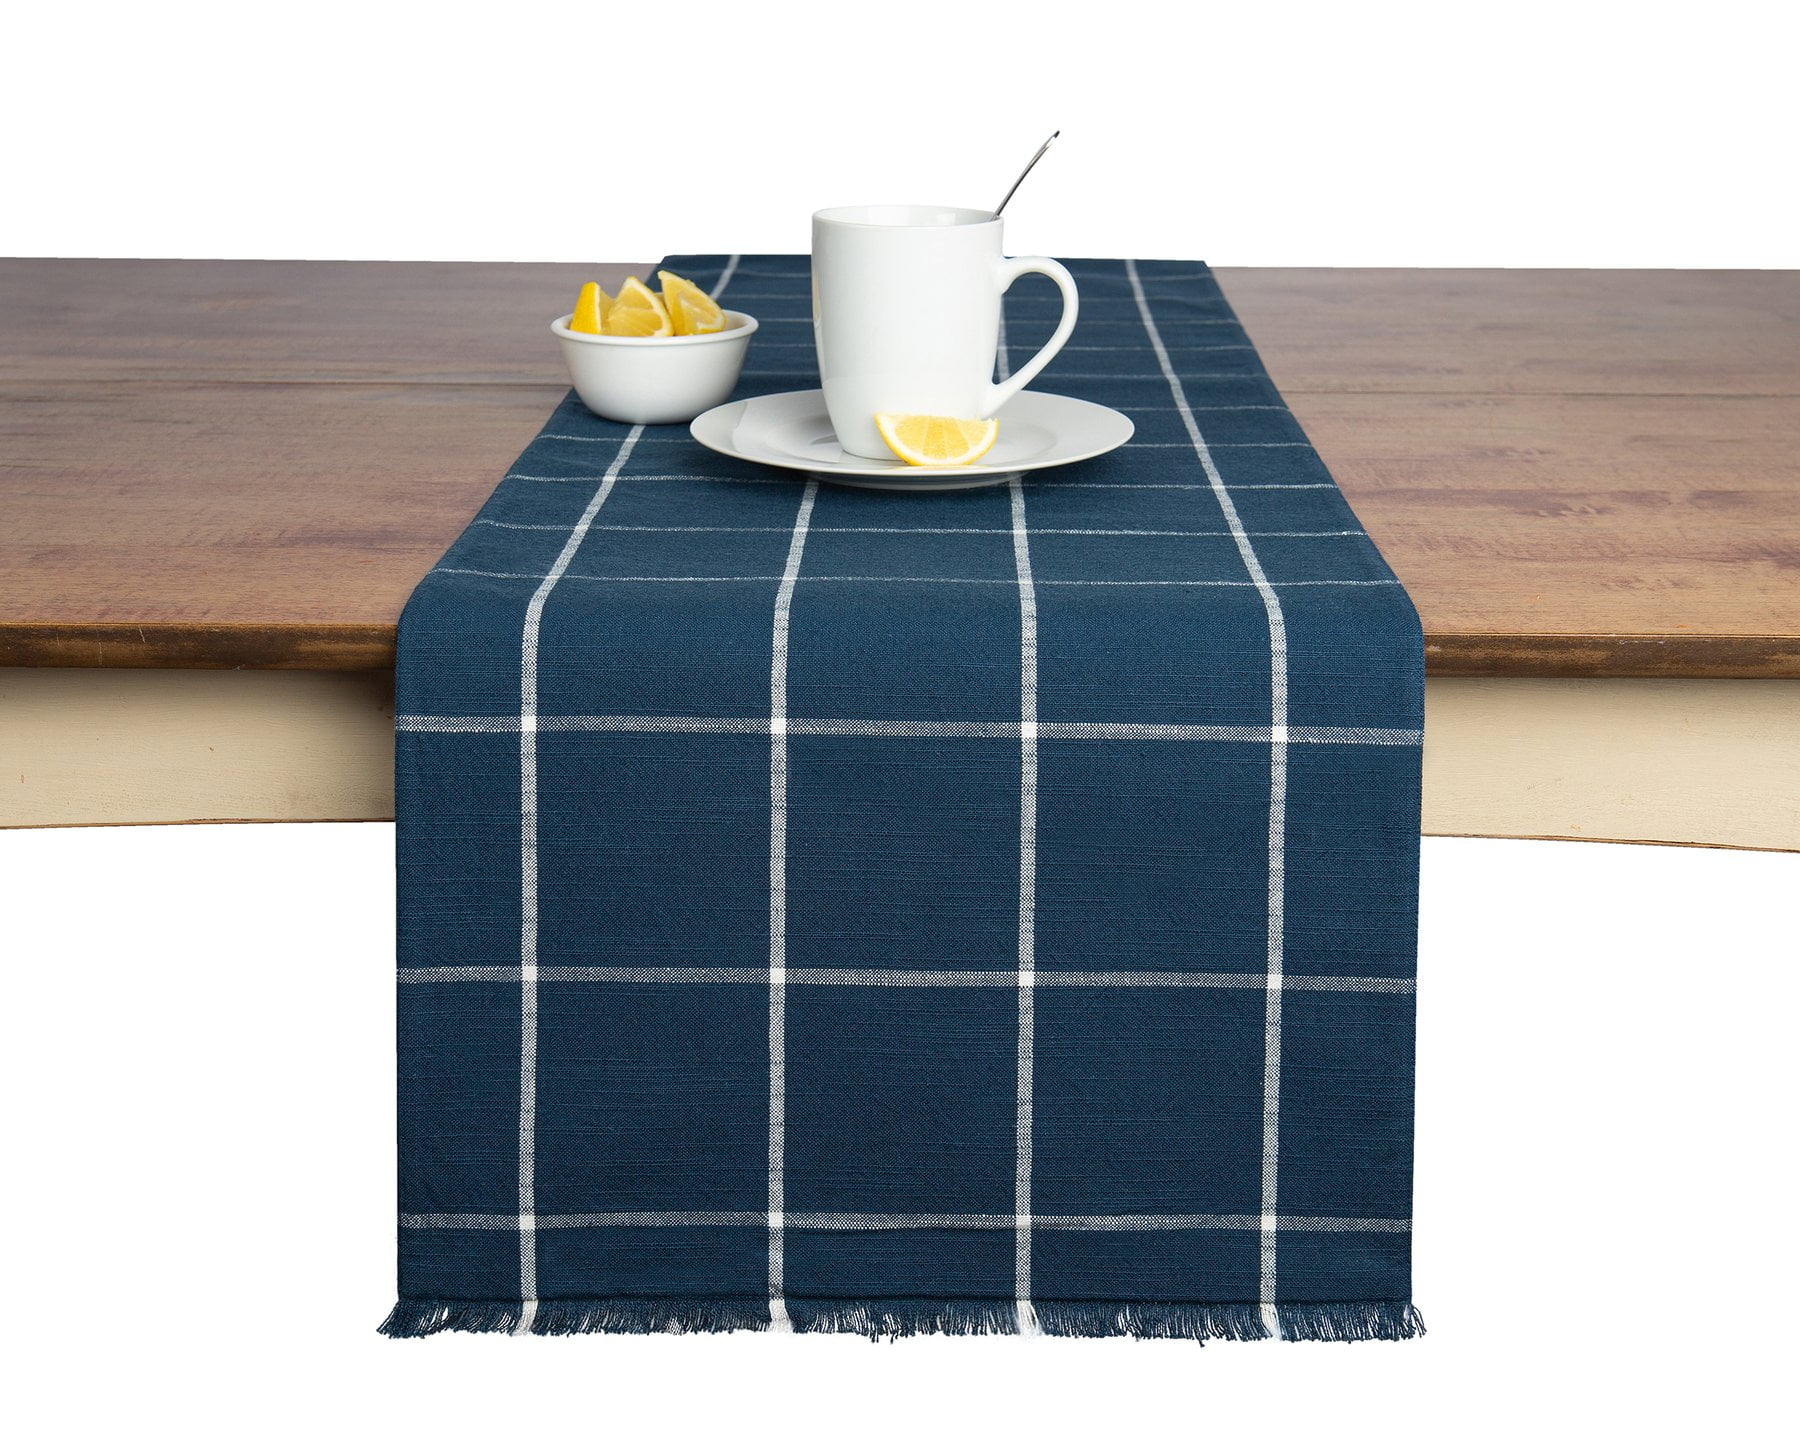 Table Runner Cotton Farmhouse Plaid 14 in x 72 in, Table Décor for Kitchen or Dining, Navy Blue Cloth Woven Table Runners, Oeko-Tex Cotton